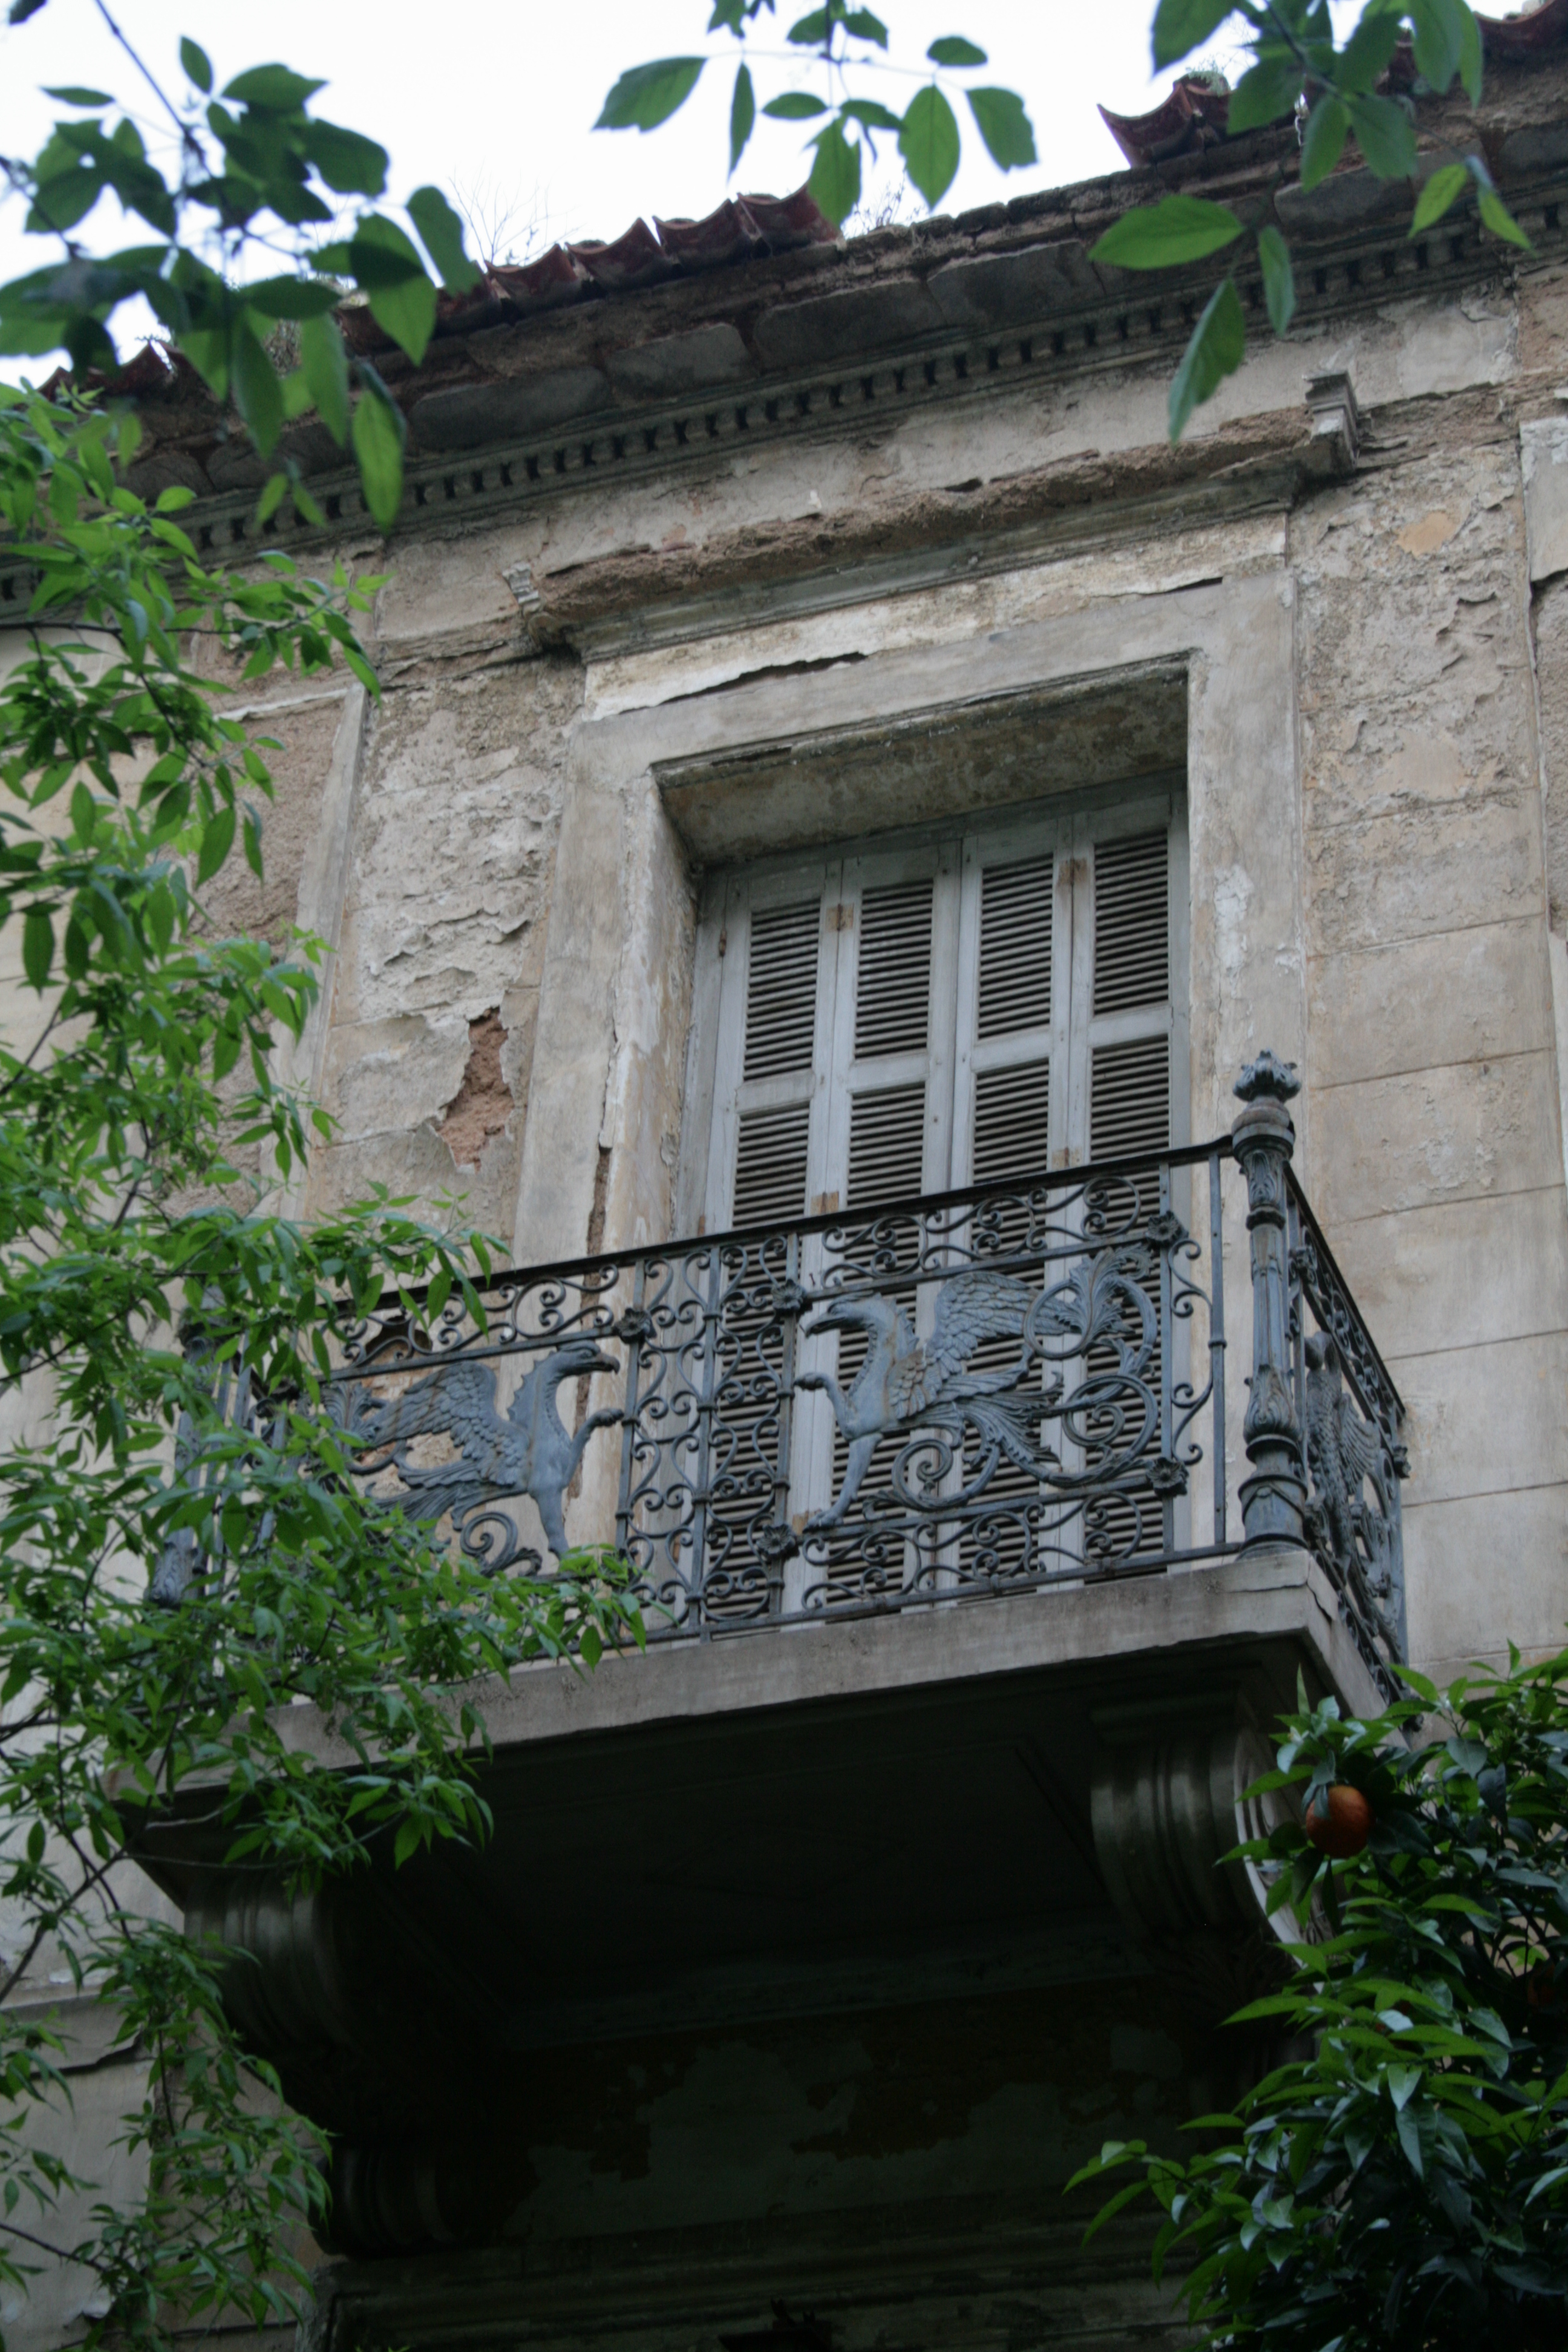 General view of the balcony (2013)